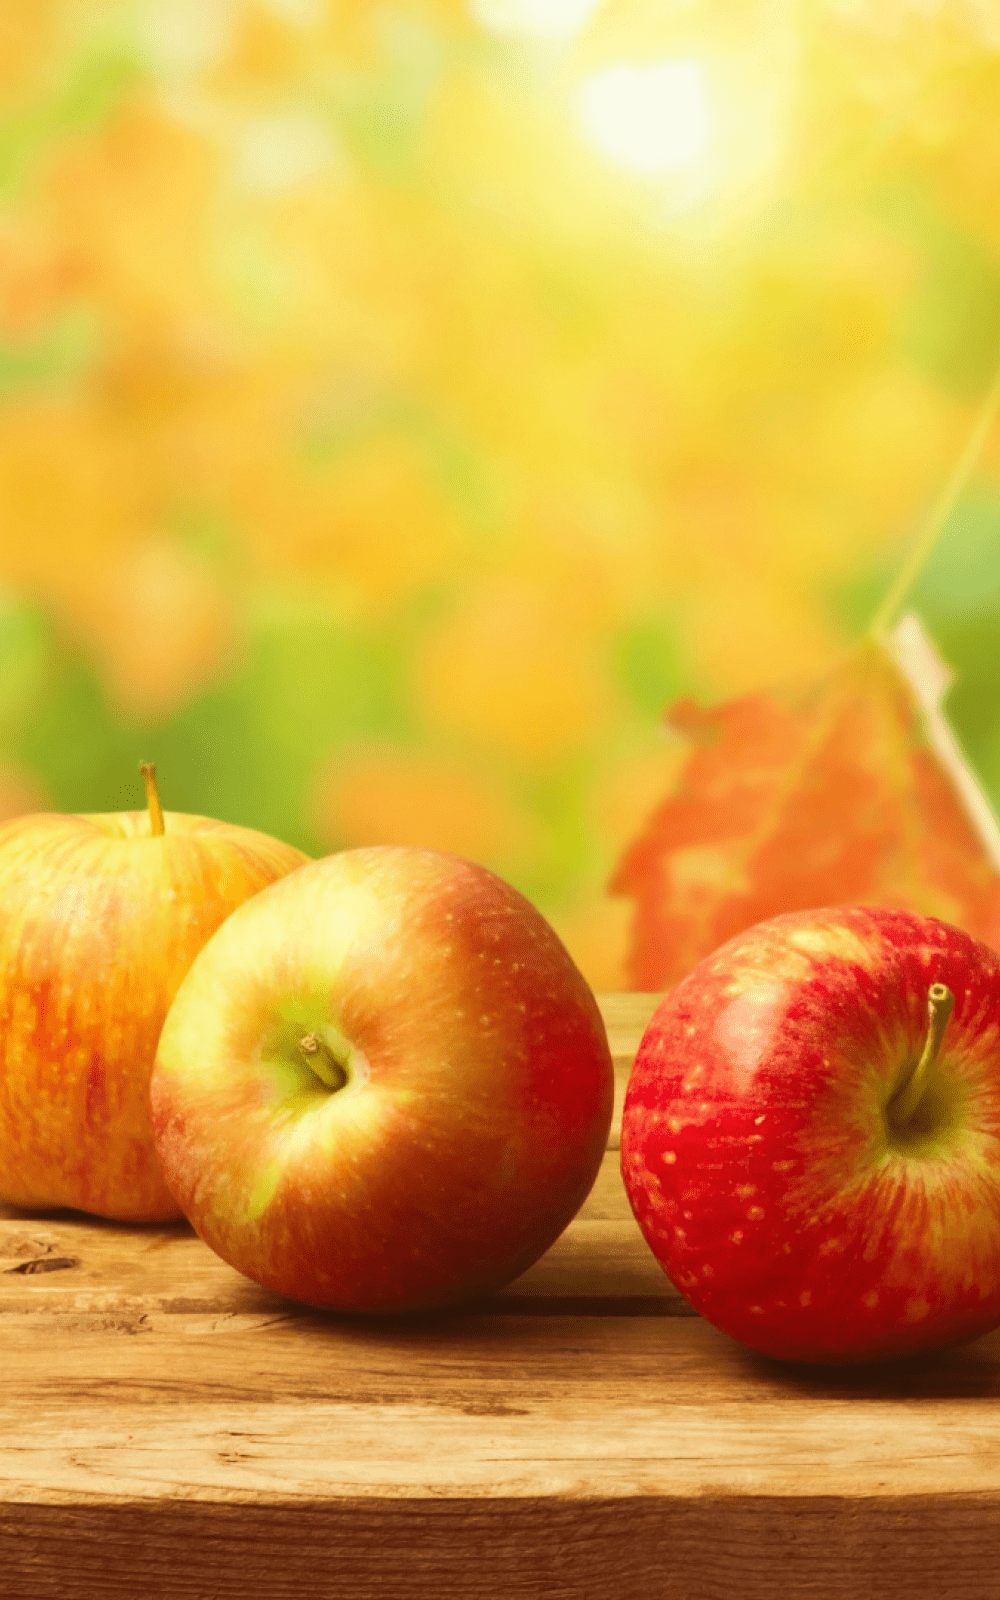 Autumn Apple Wallpapers Top Free Autumn Apple Backgrounds Wallpaperaccess 